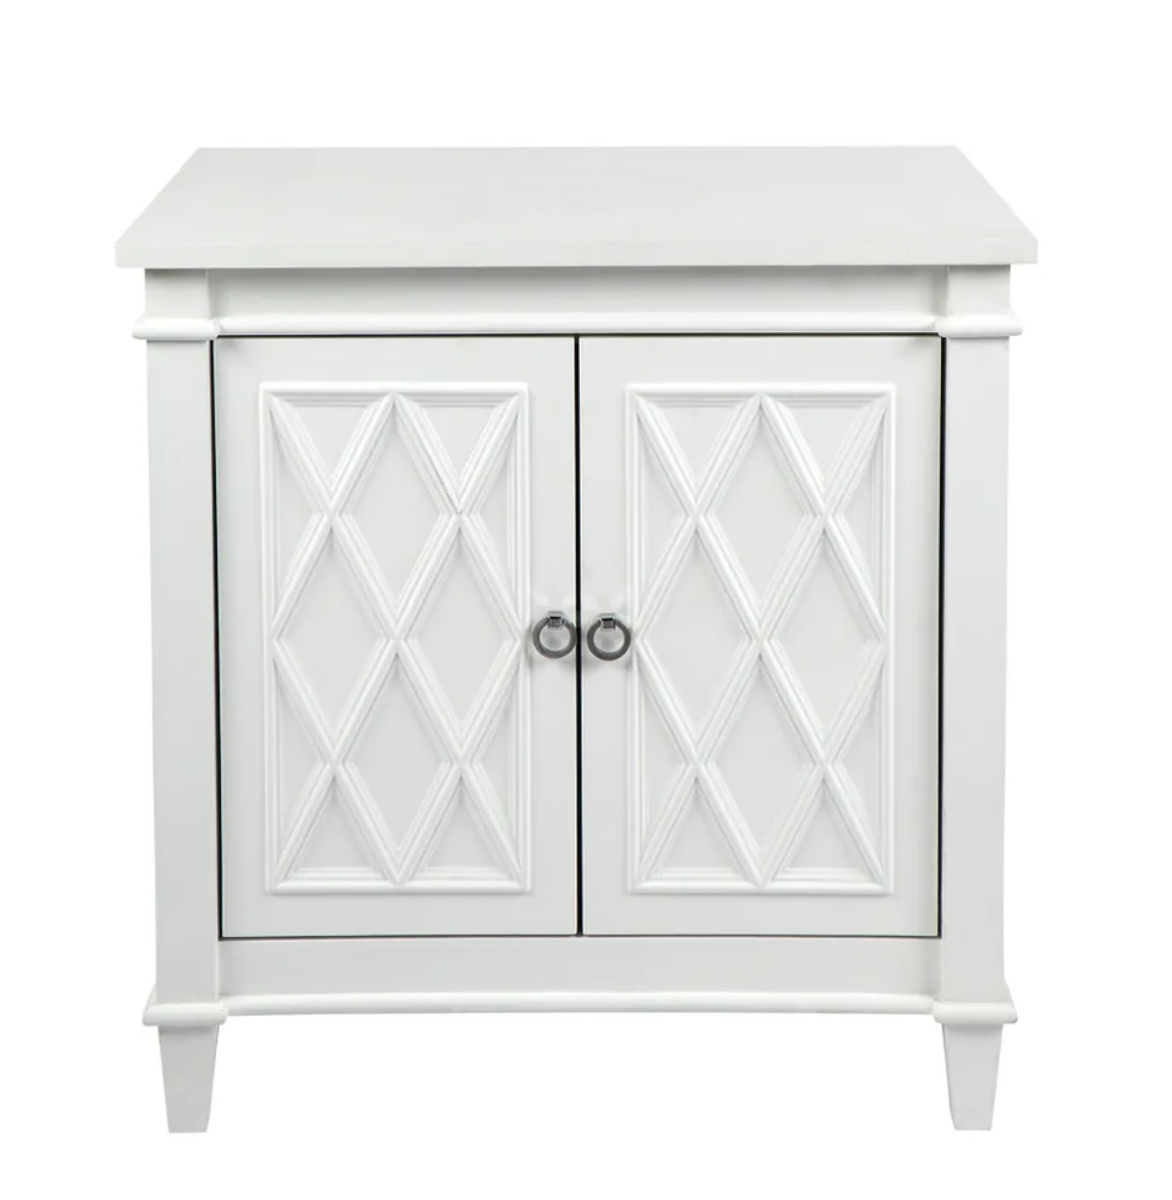 Orchid Cabinet - White